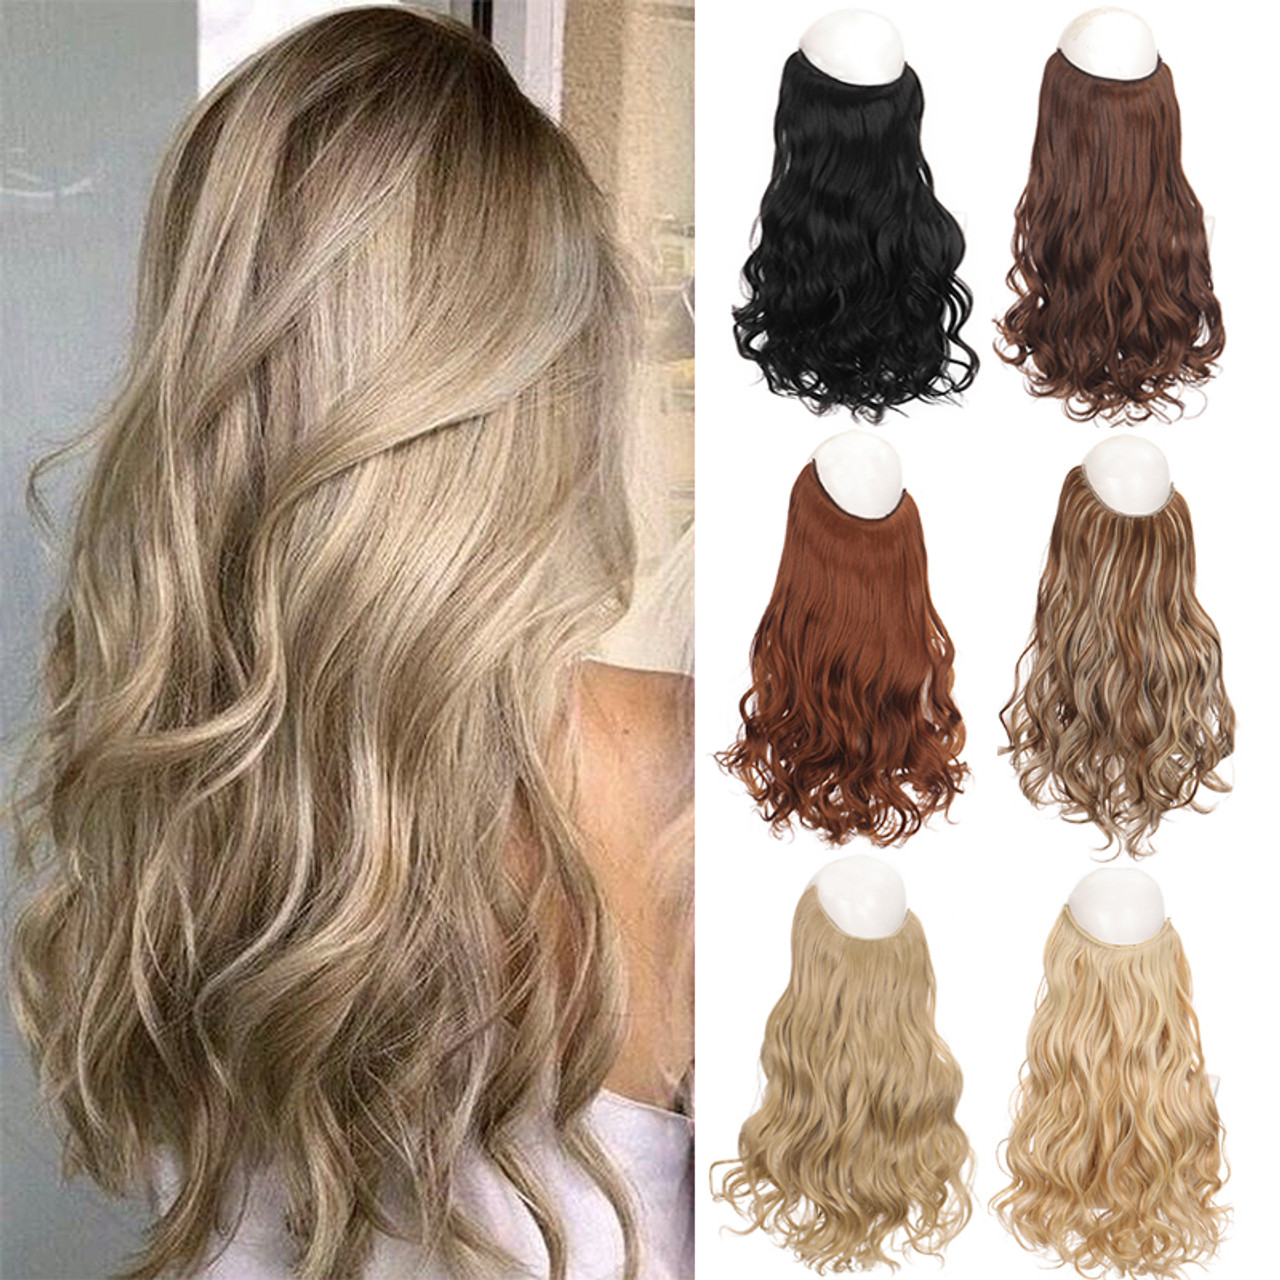 Halo Hair Extensions 20 Inch Invisible Wire Medium Brown Hair